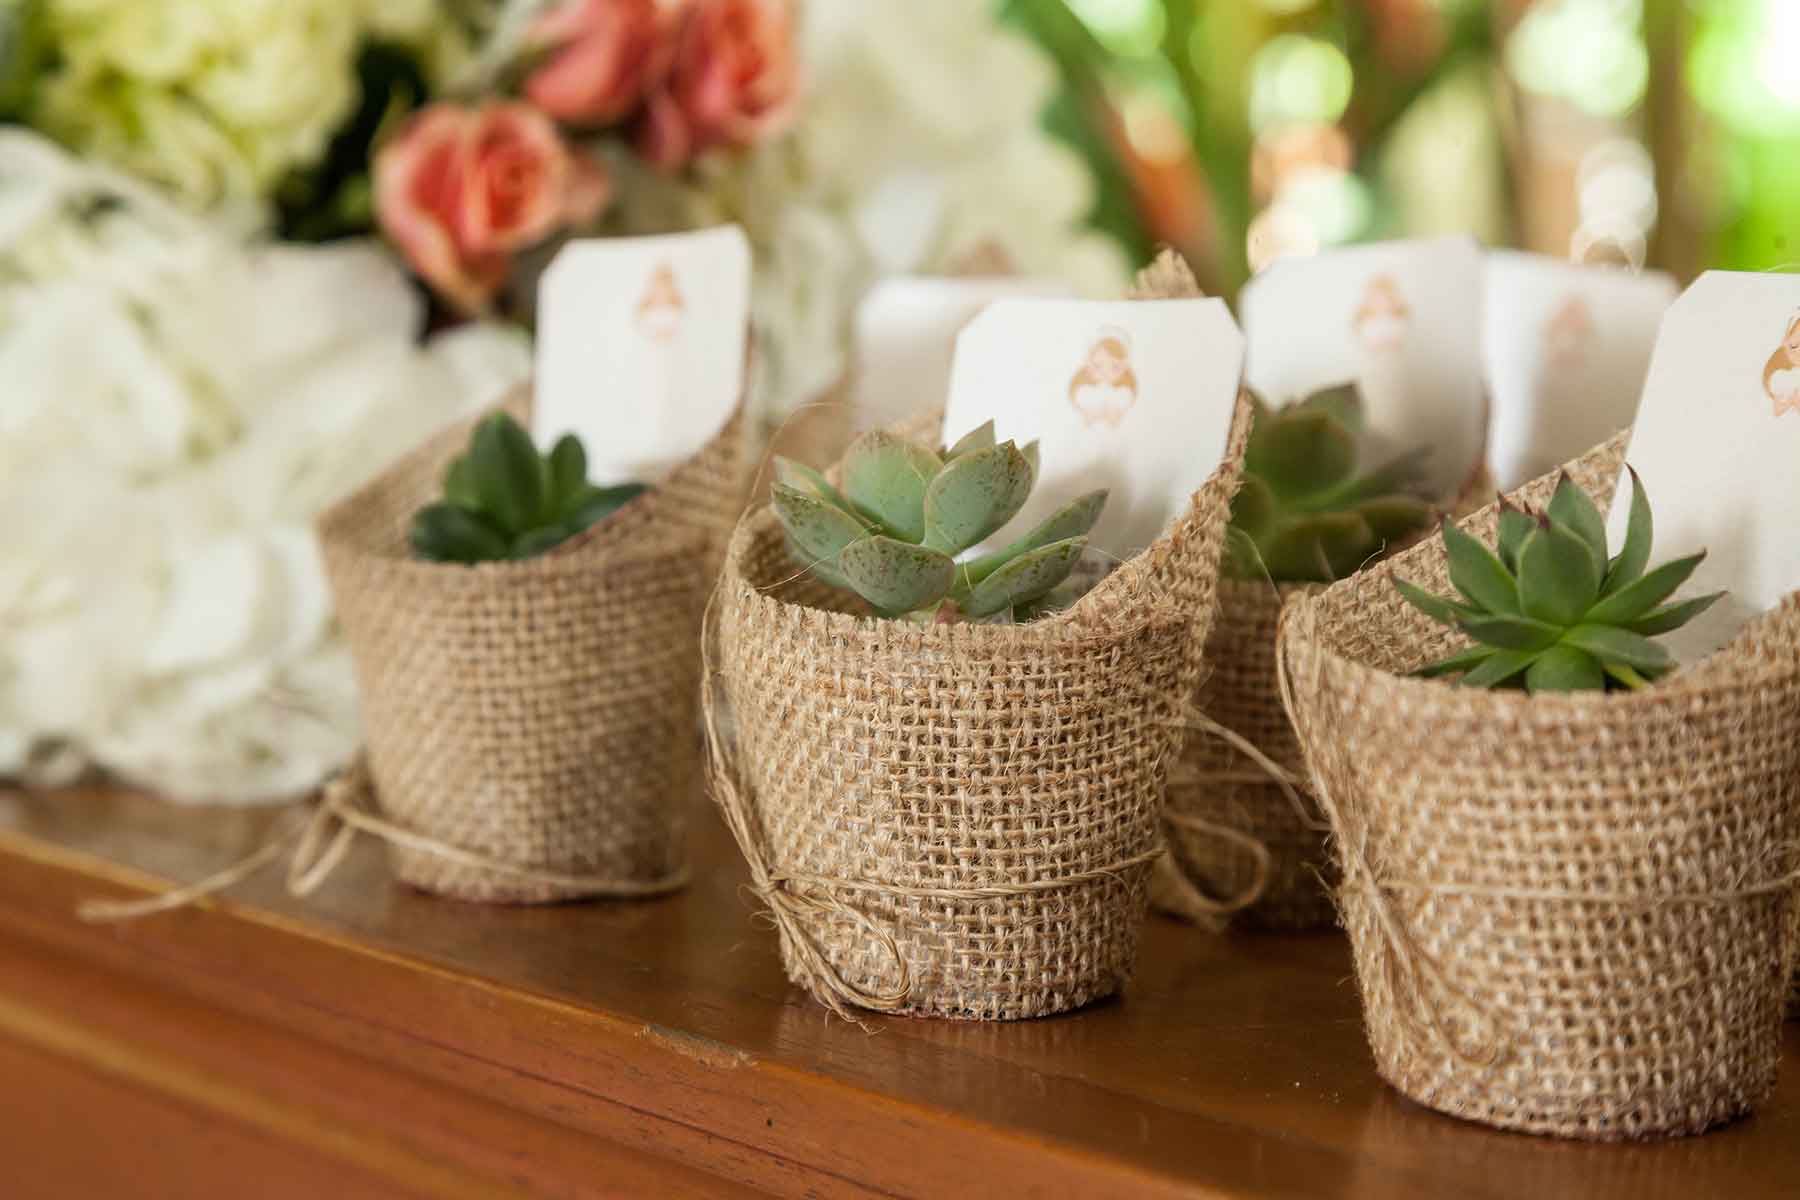 Wedding Cups Rustic Favors For Guests in Bulk Boho Party Gifts